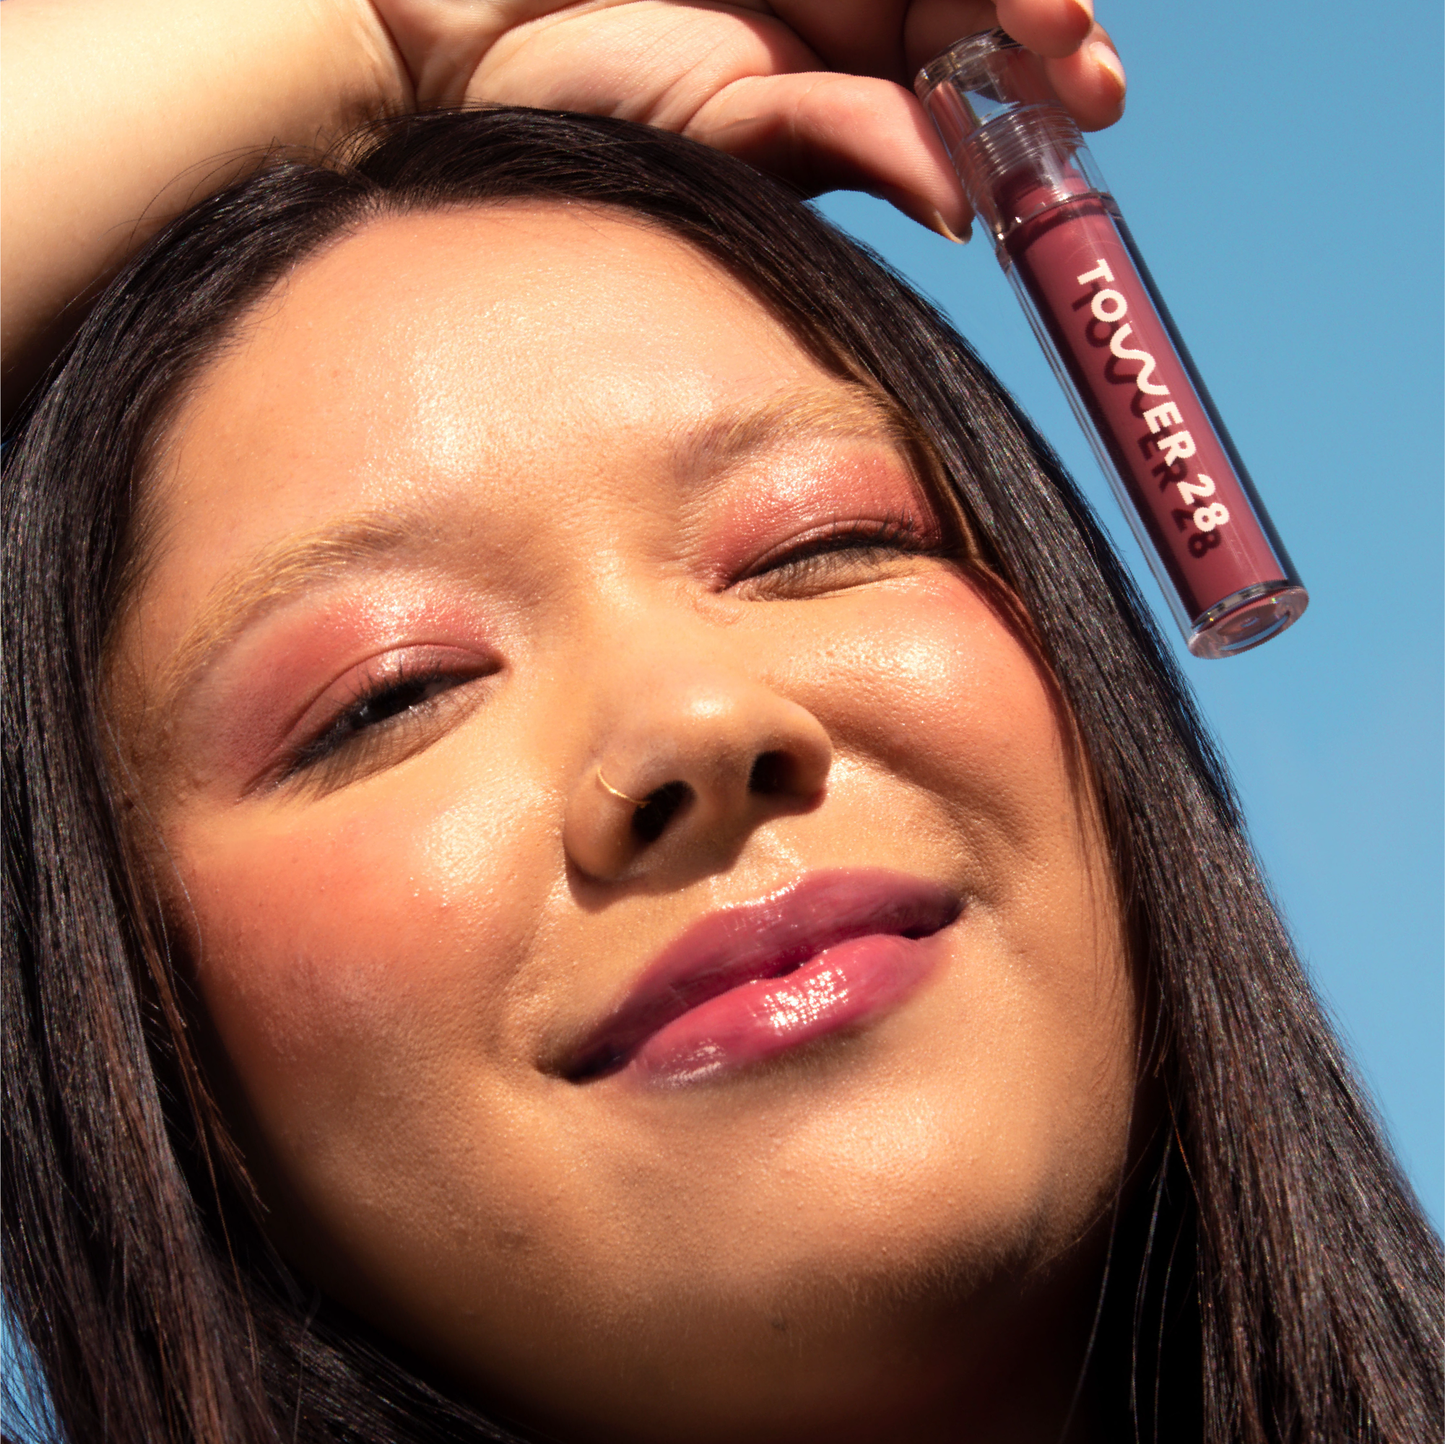 Sesame [A model wearing the Tower 28 Beauty ShineOn Lip Jelly in the shade Sesame on her lips]